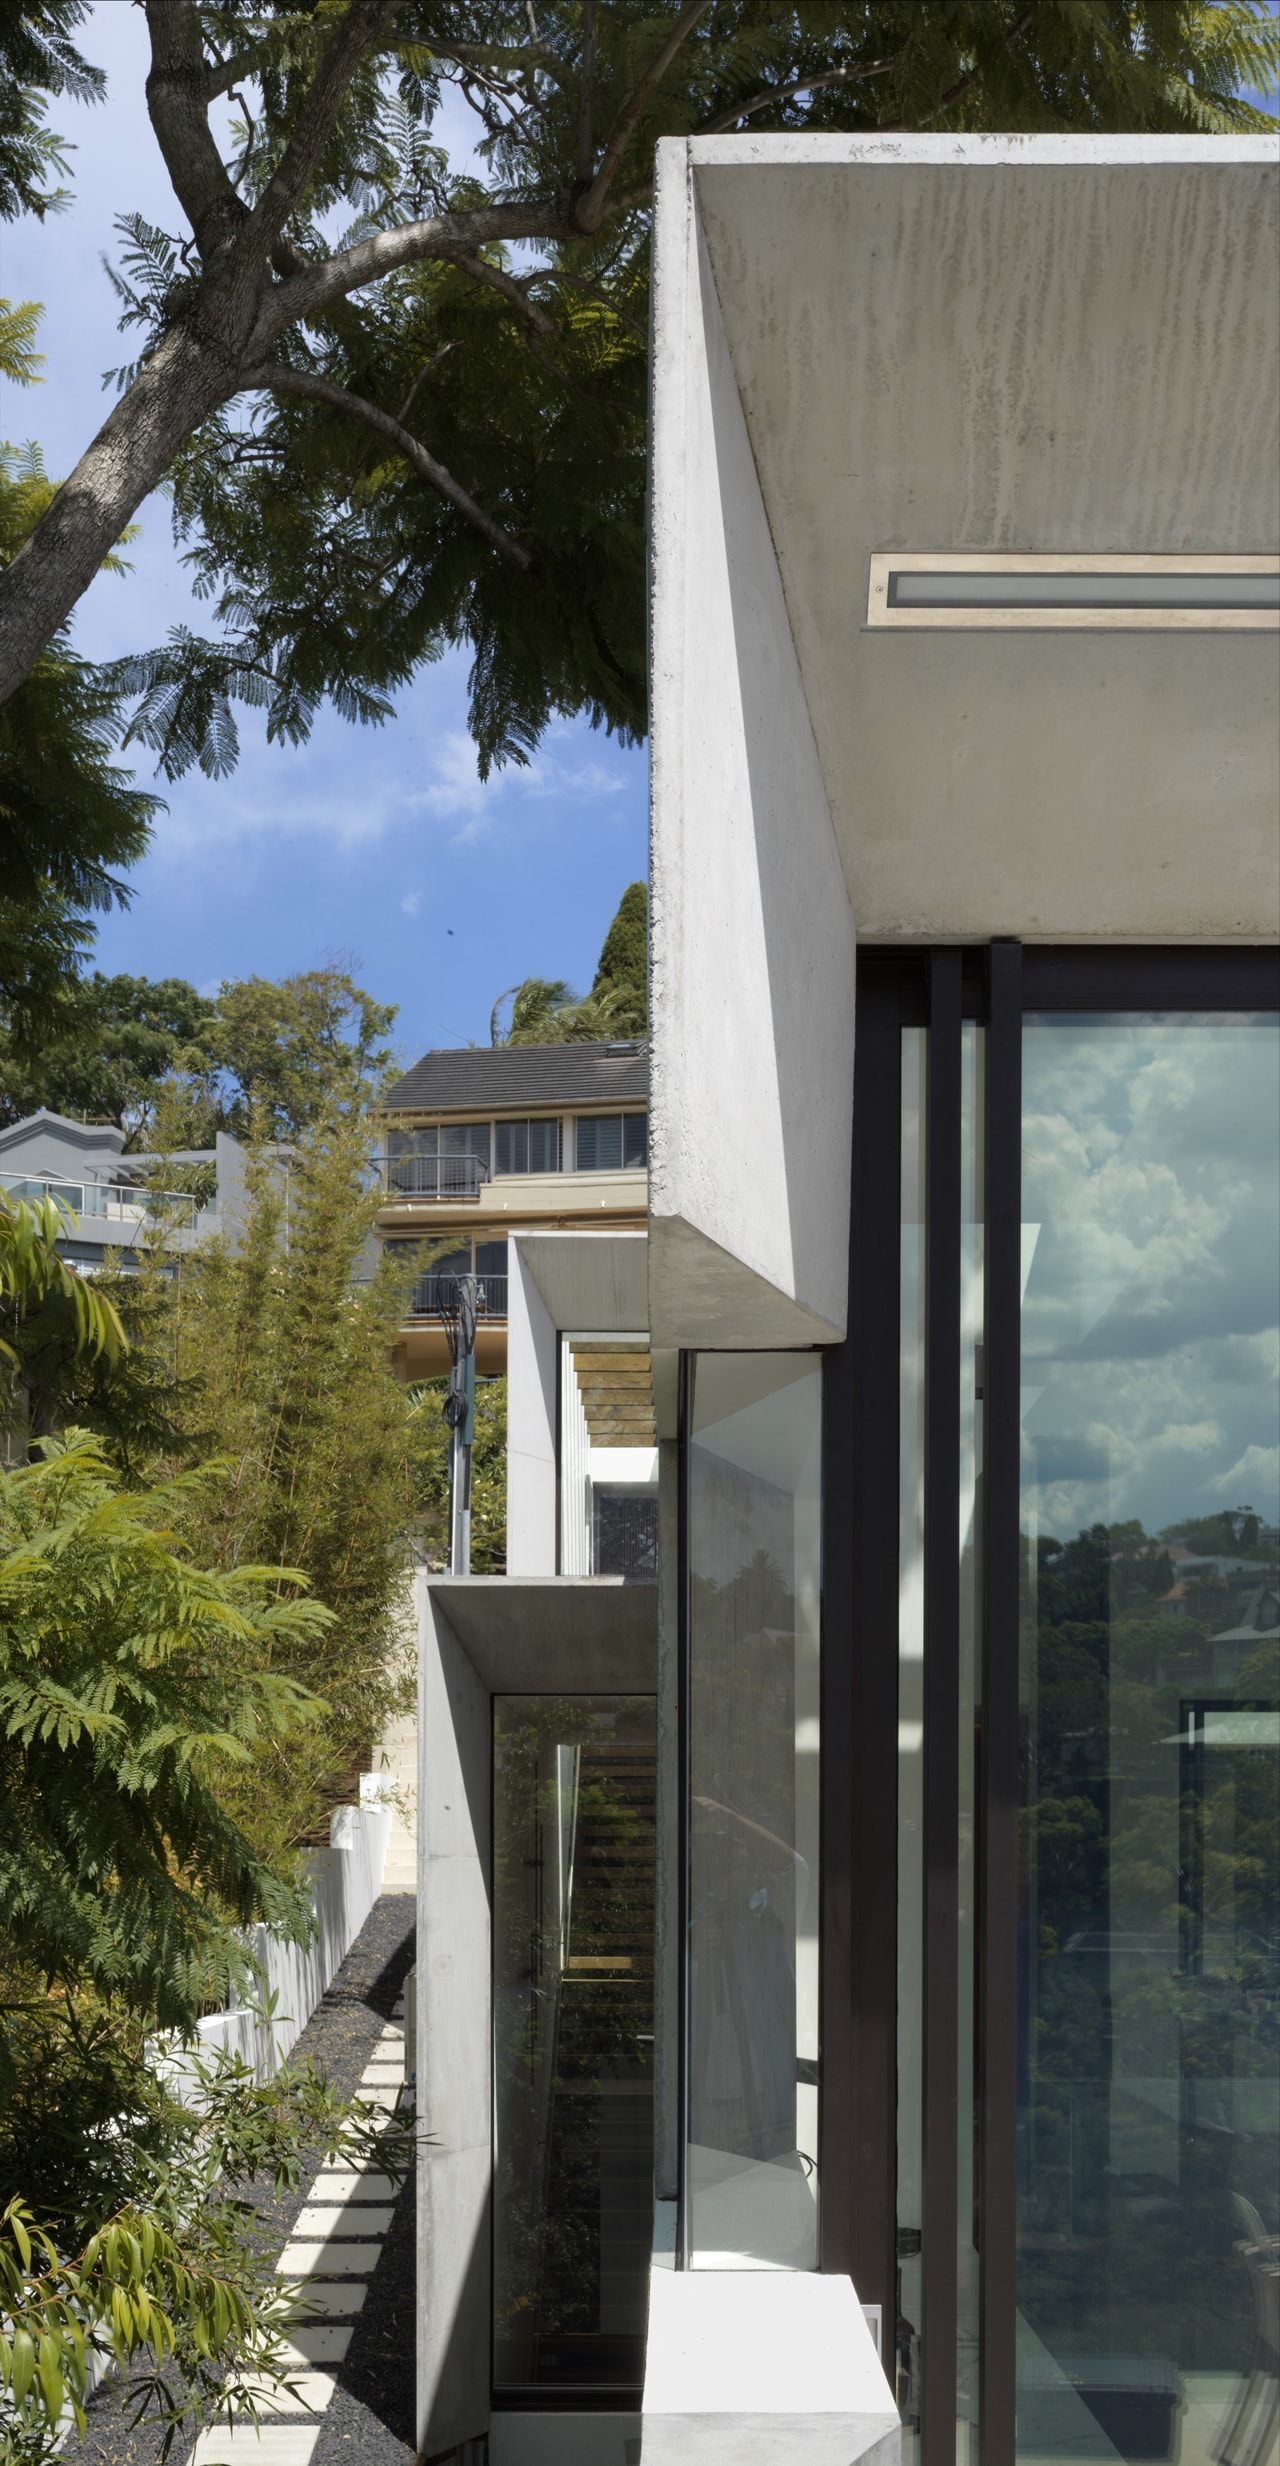 Concrete and glass facade on the hillside house designed by Rolf Ockert